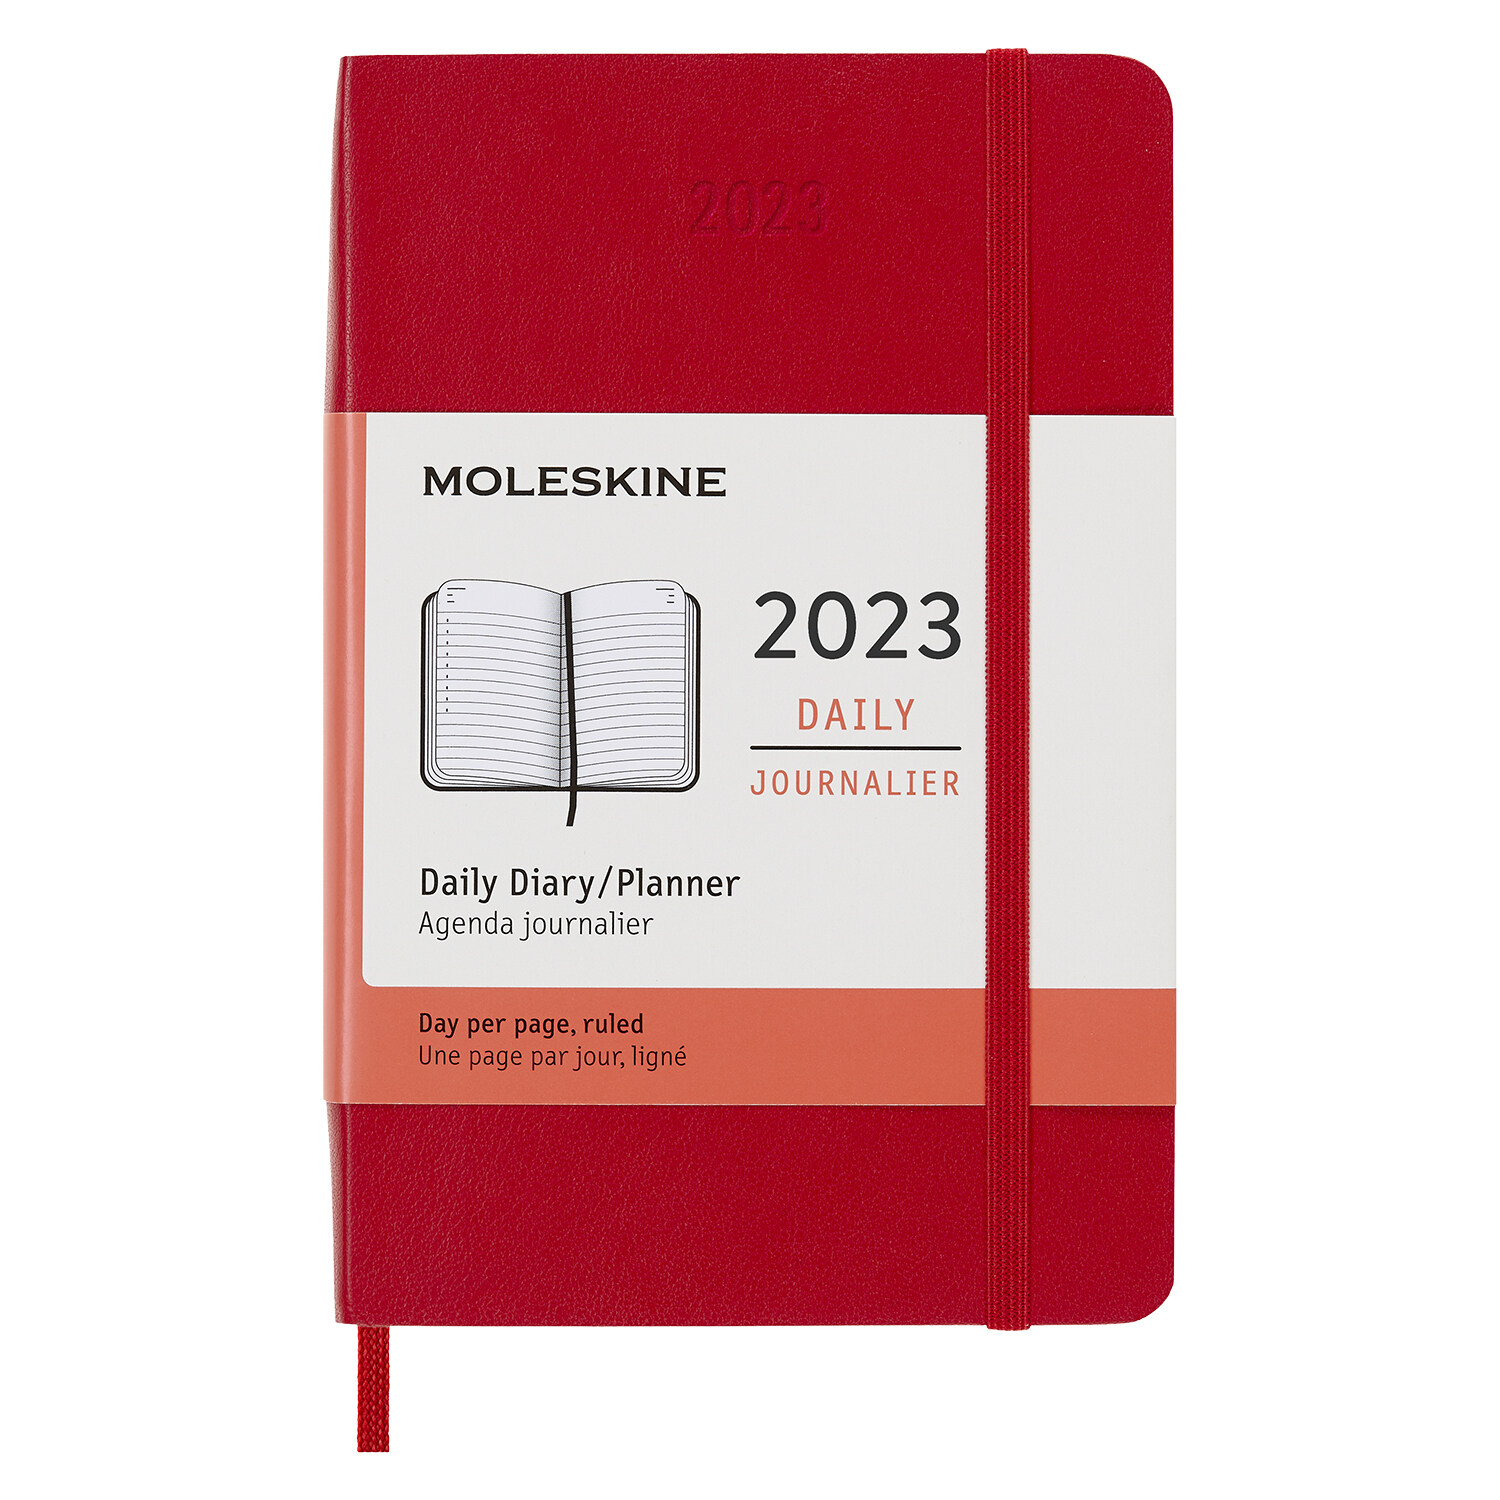 Moleskine 2023 Daily Planner, 12m, Pocket, Scarlet Red, Soft Cover (3.5 X 5.5) (Other)